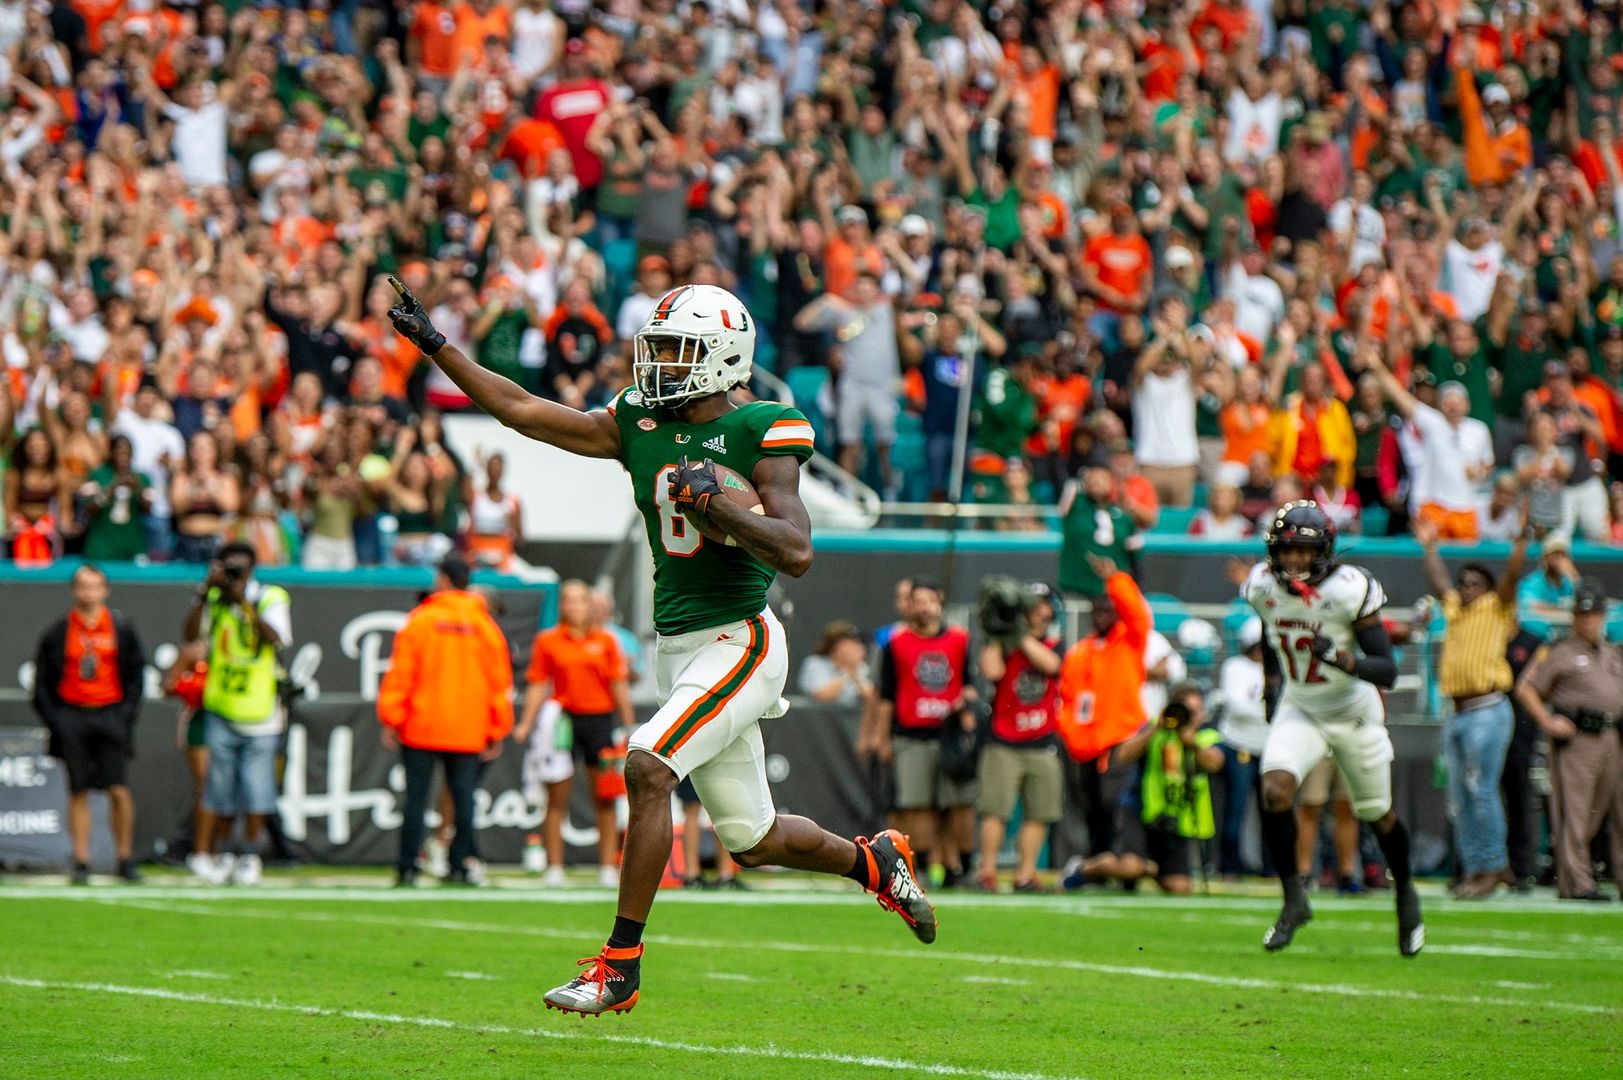 Canes Release 2020 Football Schedule